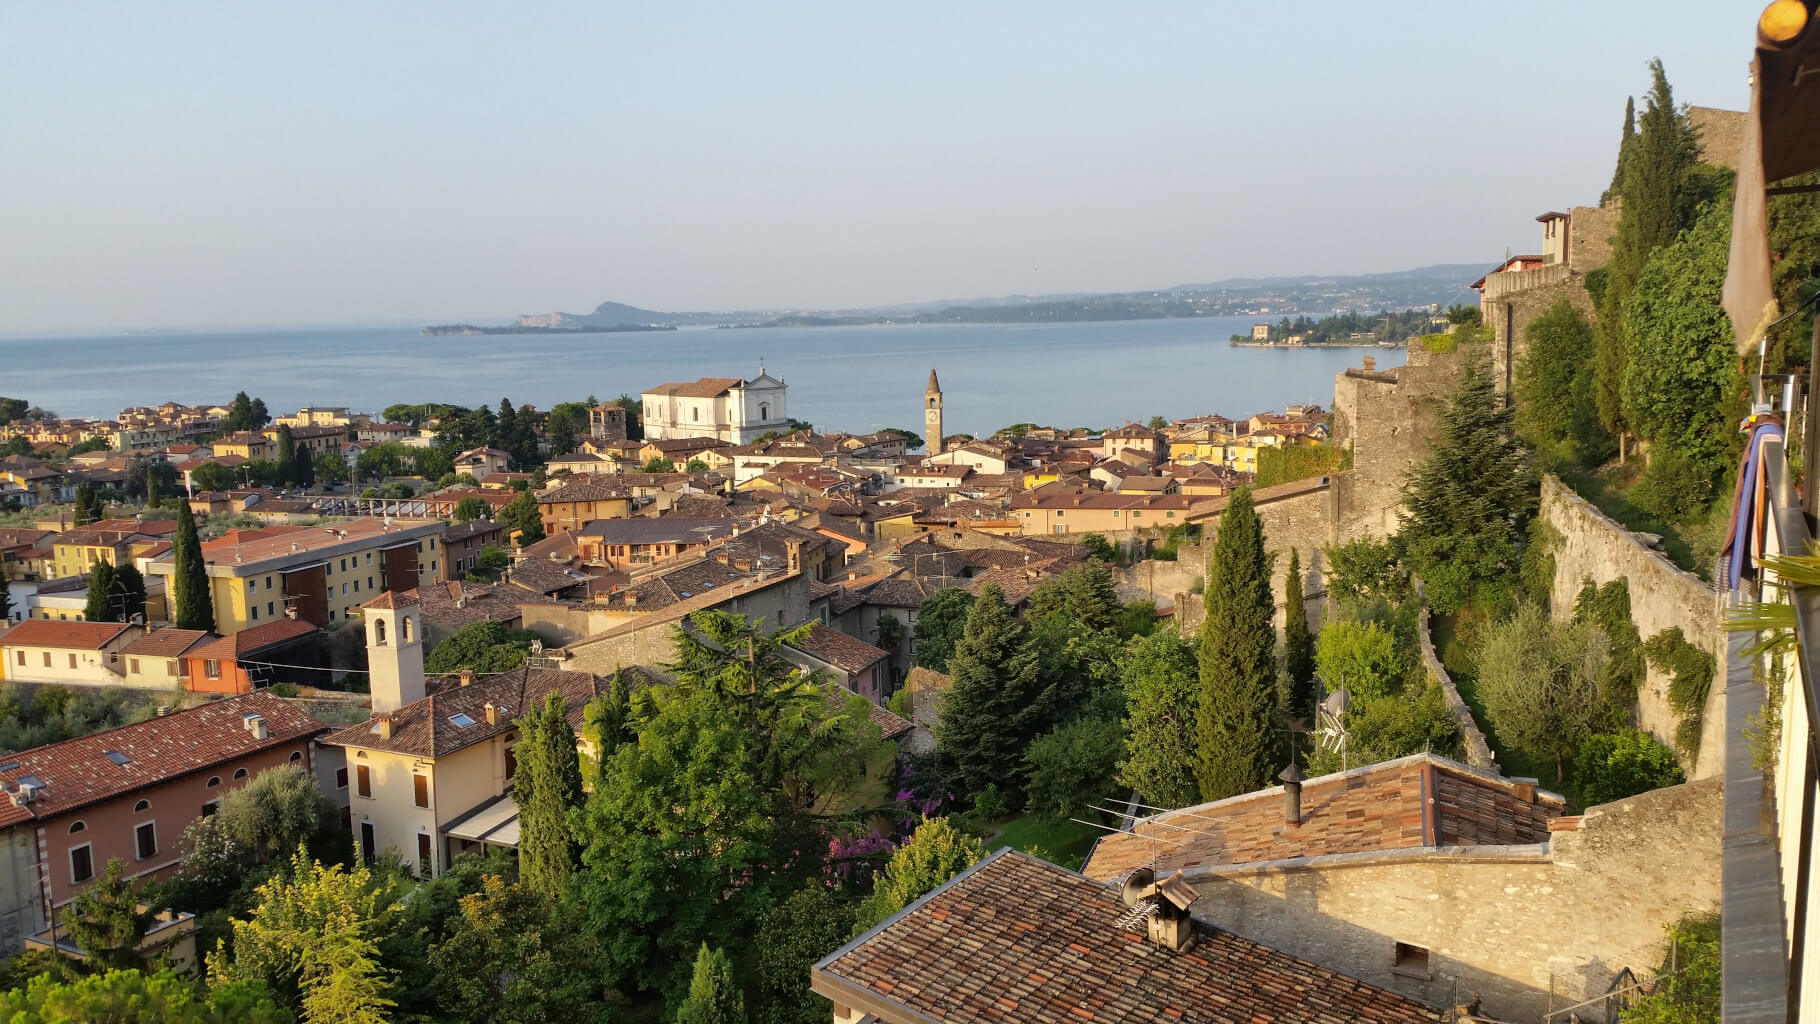 Three things to see in Toscolano Maderno